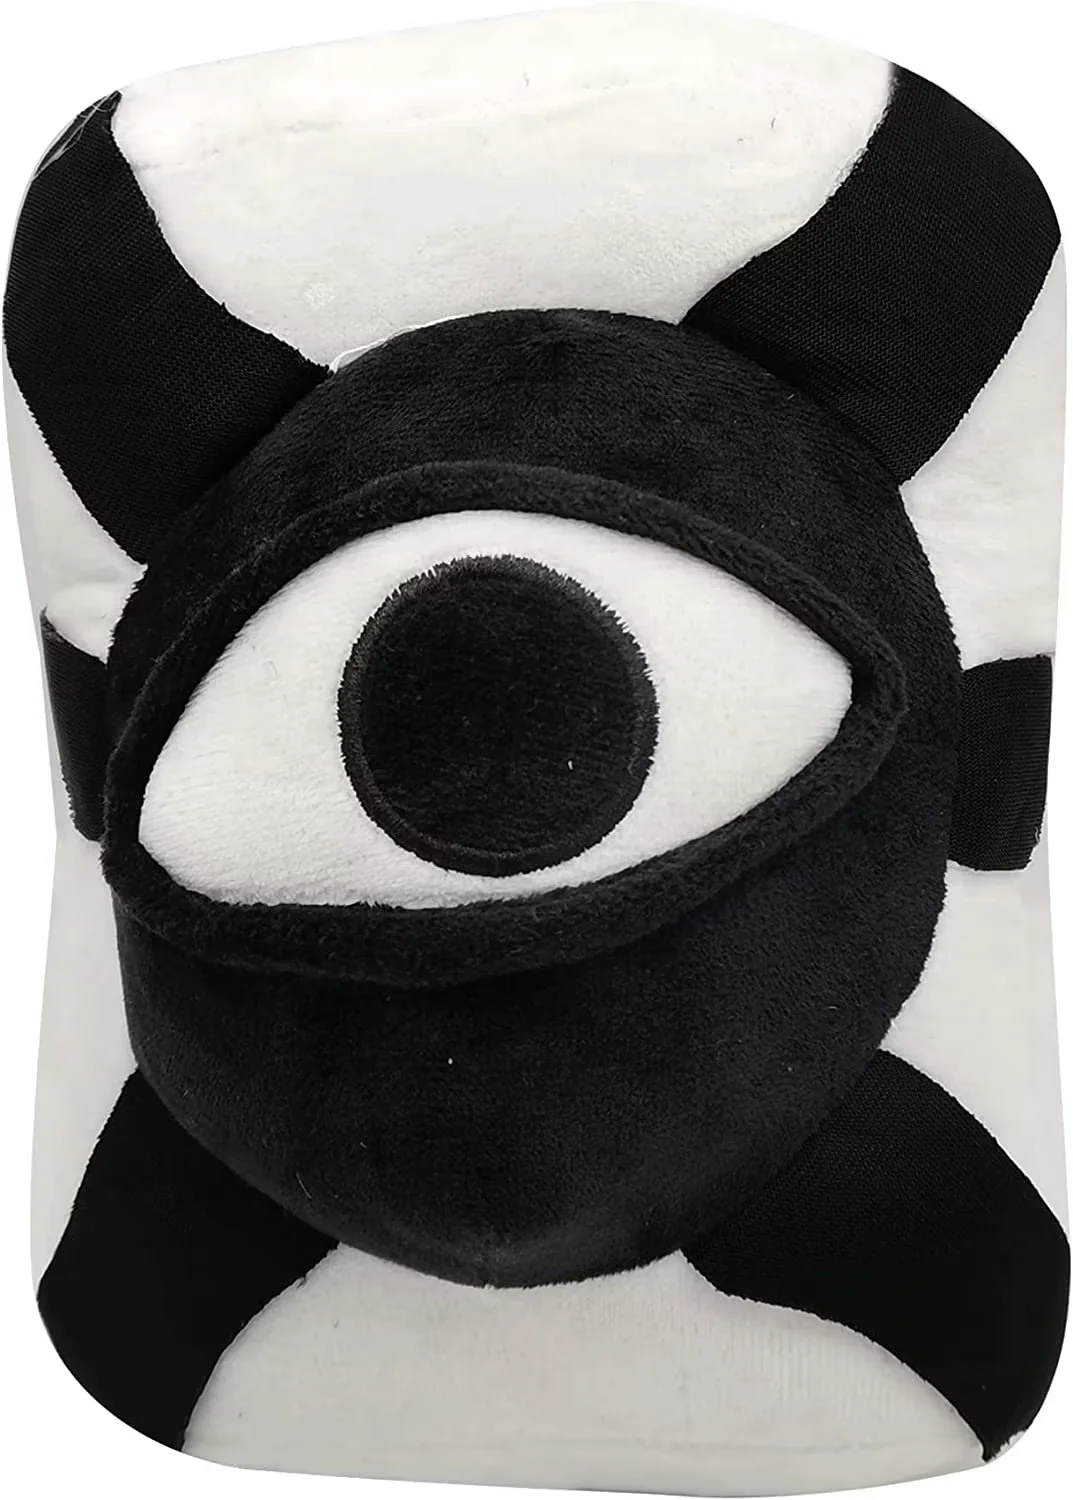  CHPM Doors Plush, Horror Screech Door Plushies Toys, Soft Game  Monster Stuffed Doll for Kids and Fans (Rush) : Toys & Games